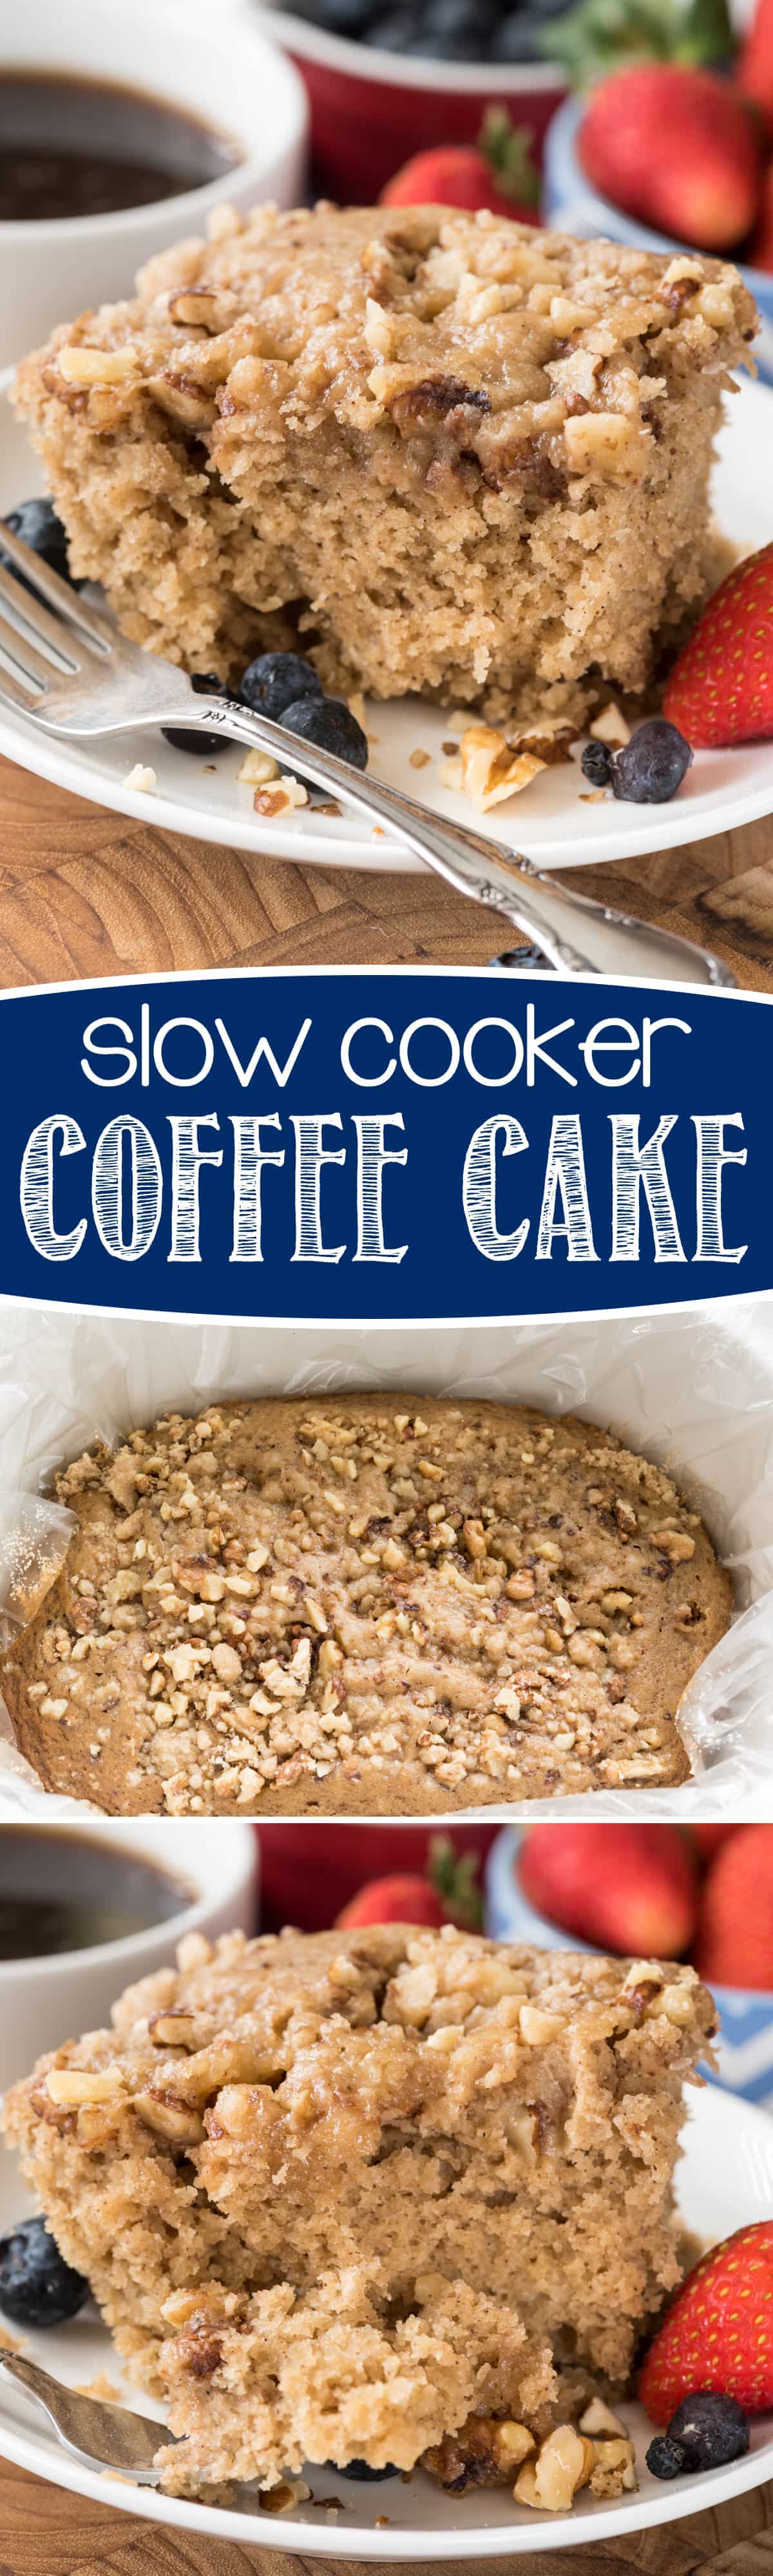 Slow Cooker Coffee Cake - this EASY coffee cake is made in a crockpot! With just a few ingredients it's a foolproof breakfast or brunch recipe!